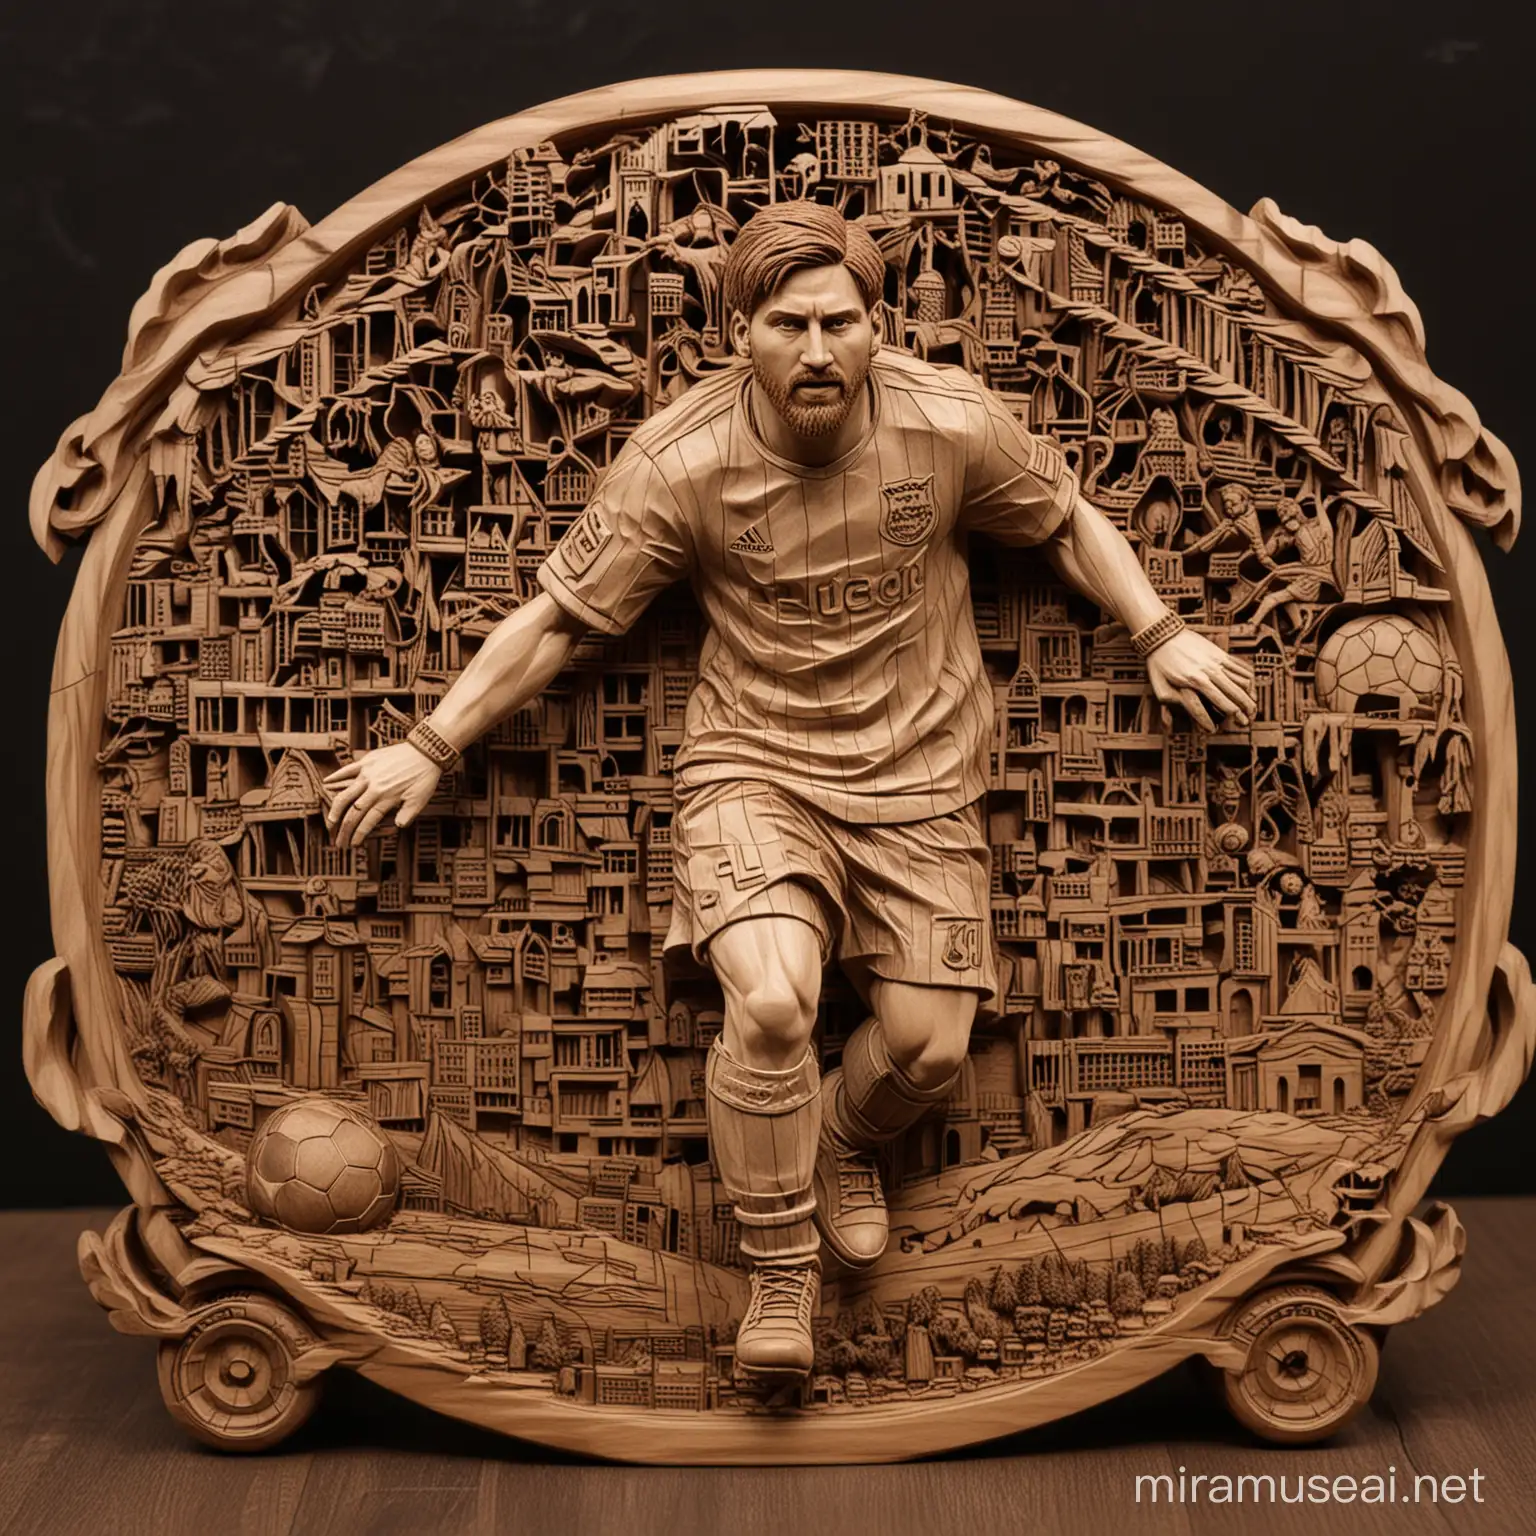 Argentina football player Lionel Messi in the style of playing football at football ground in full 3D dark wood carving